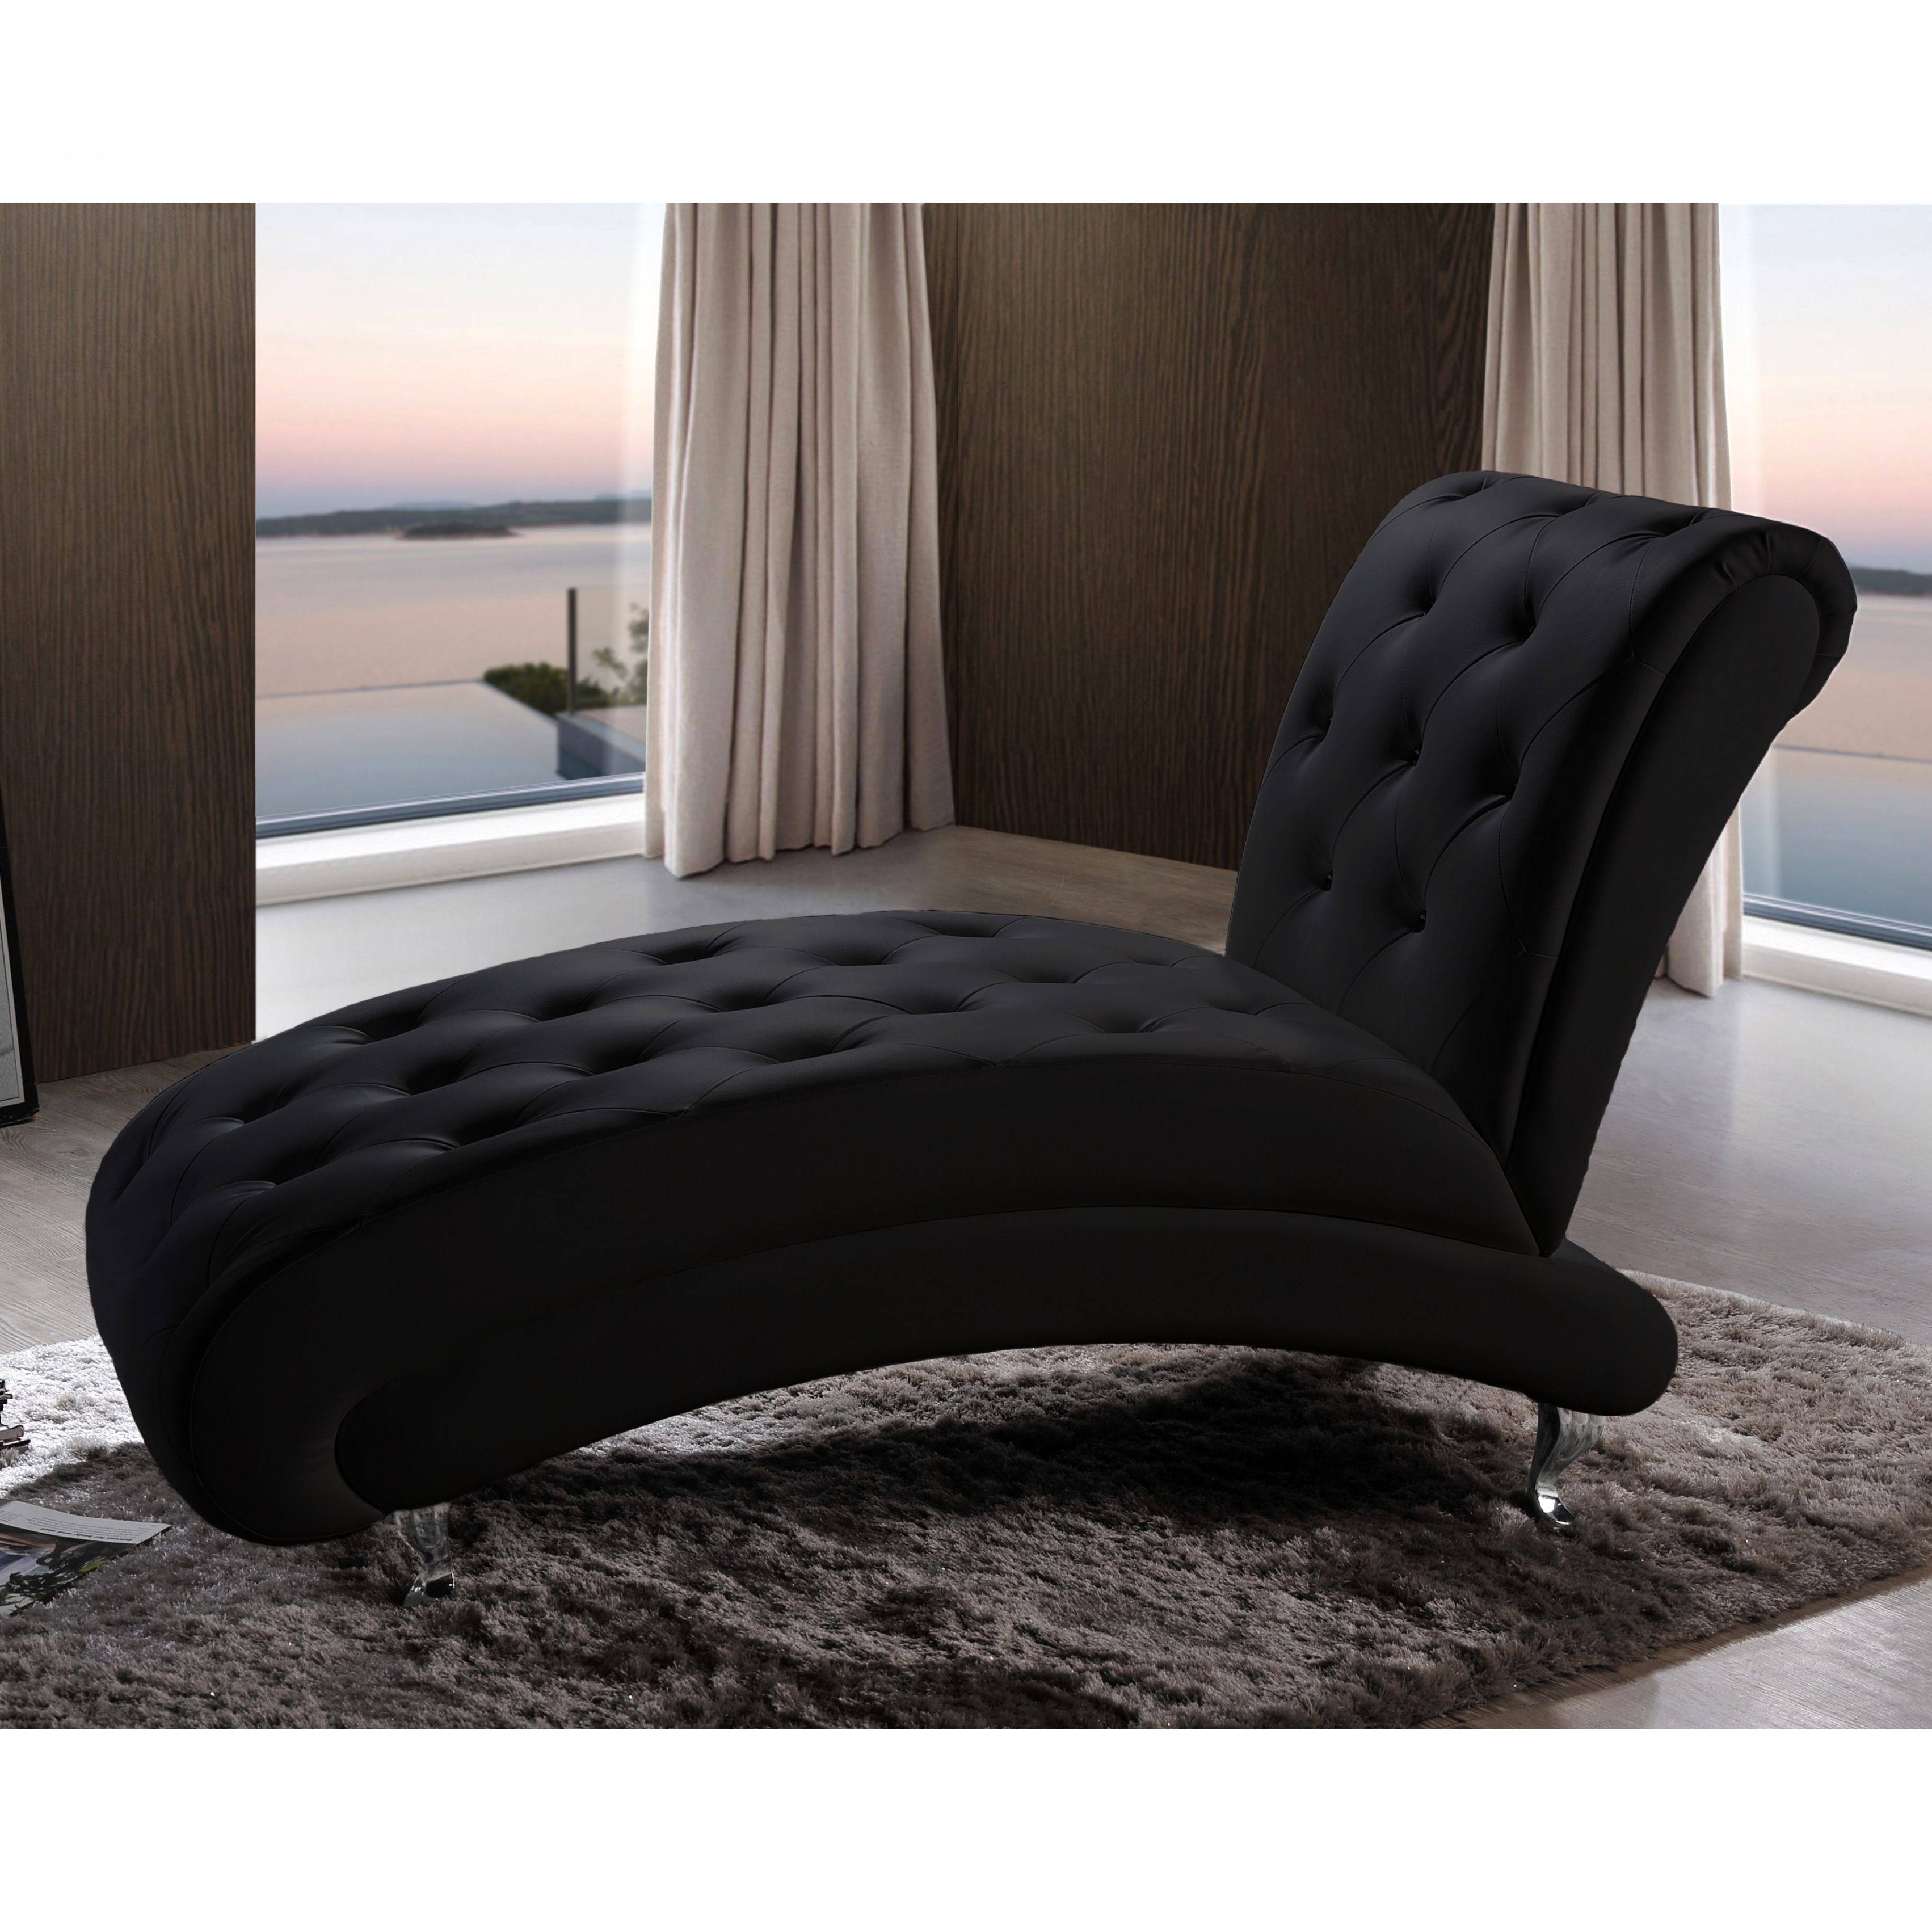 Current Black Leather Chaise Longue (View 8 of 15)